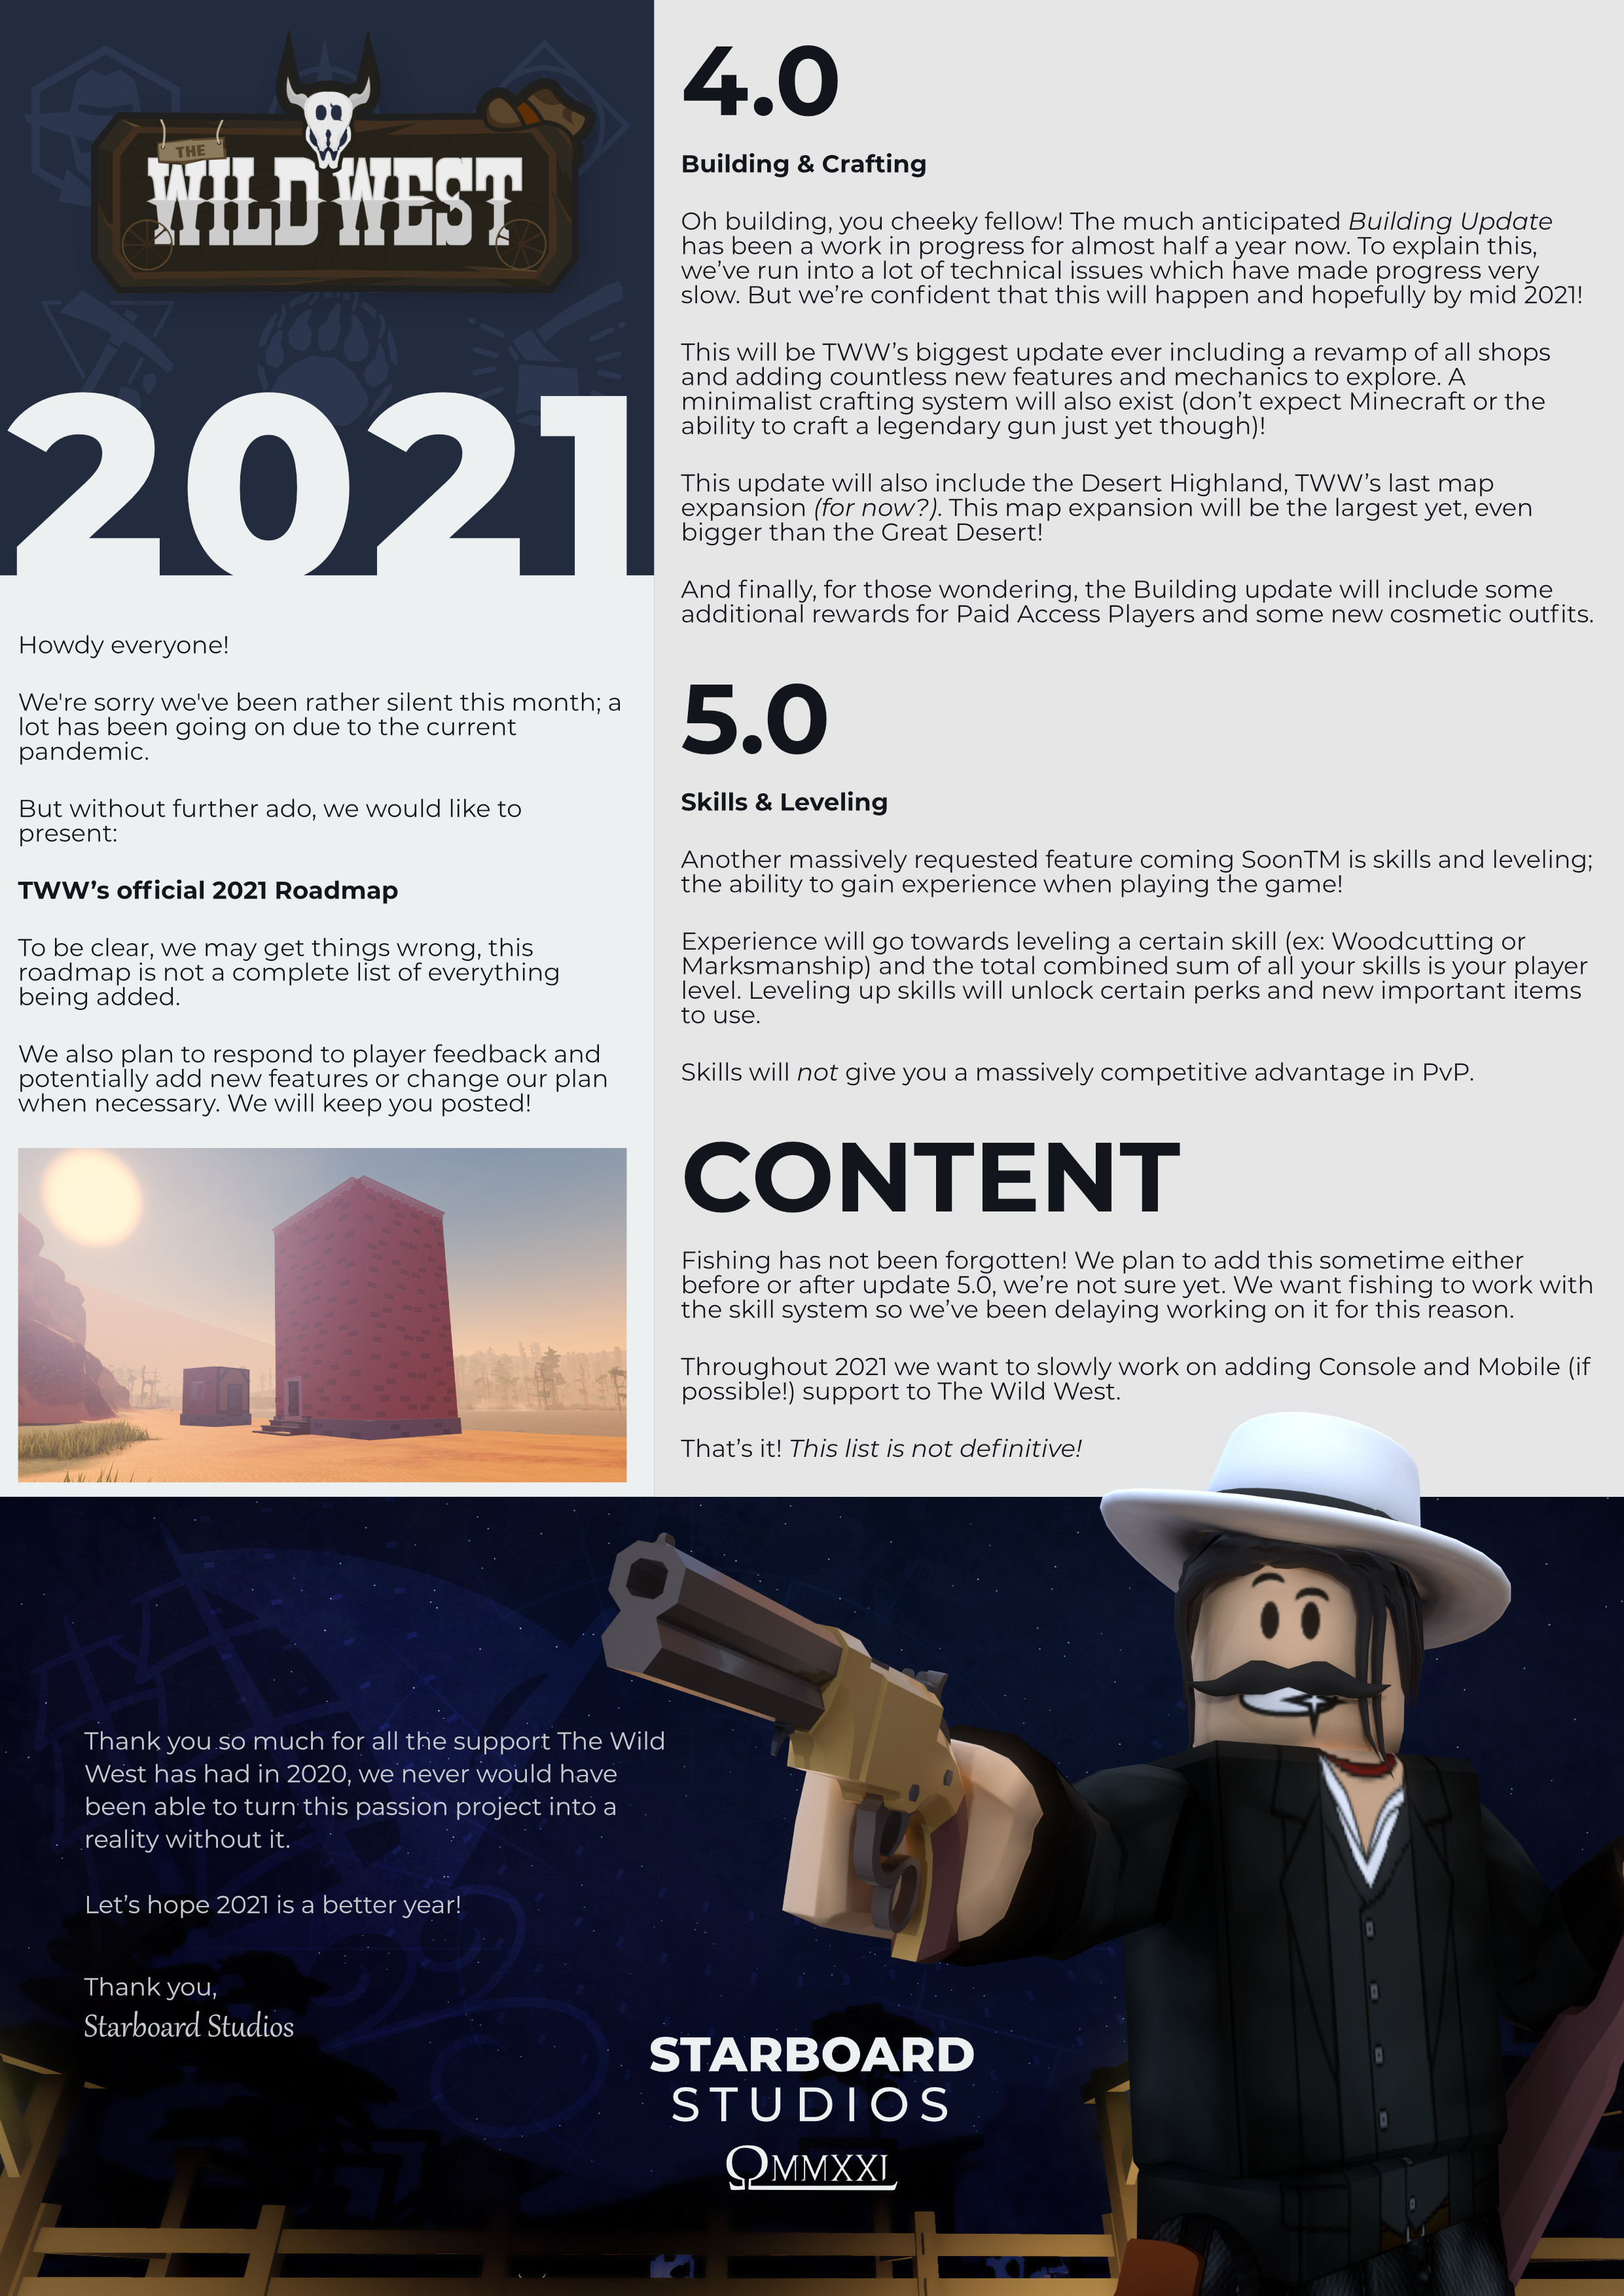 Roblox - 2021 was a year of milestones for our community. We're